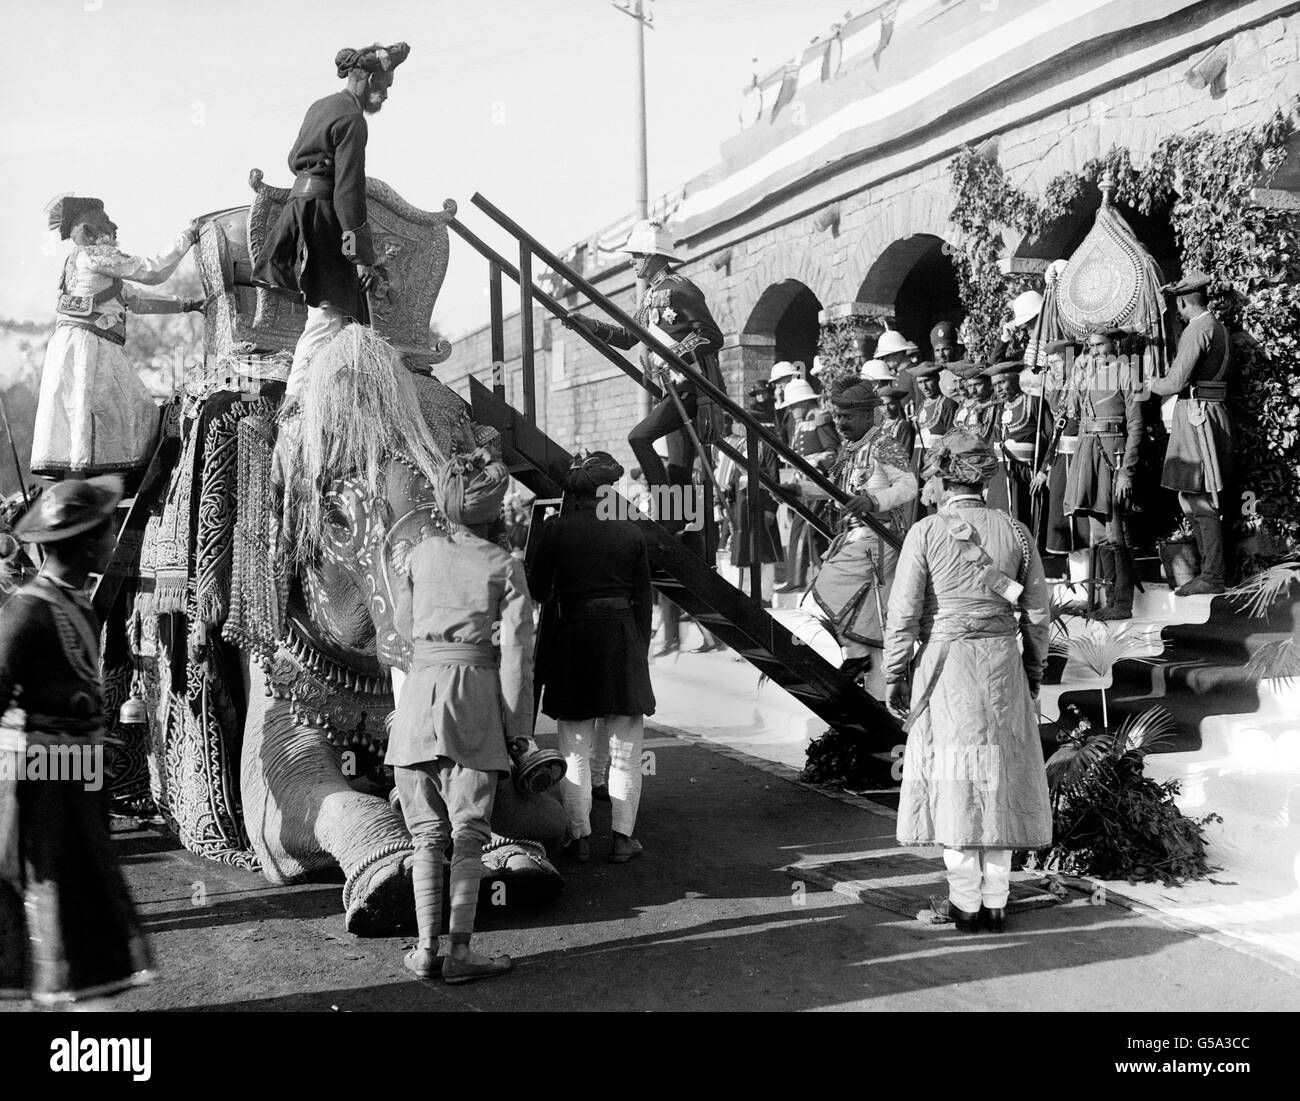 At the railway station at Gwalior in Madhya Pradesh in India, the Prince of Wales climbs the staircase to take his seat in the howdah of the Royal elephant which is reputedly 100 years old. The Prince is followed by the Maharajah of Gwalior. Stock Photo